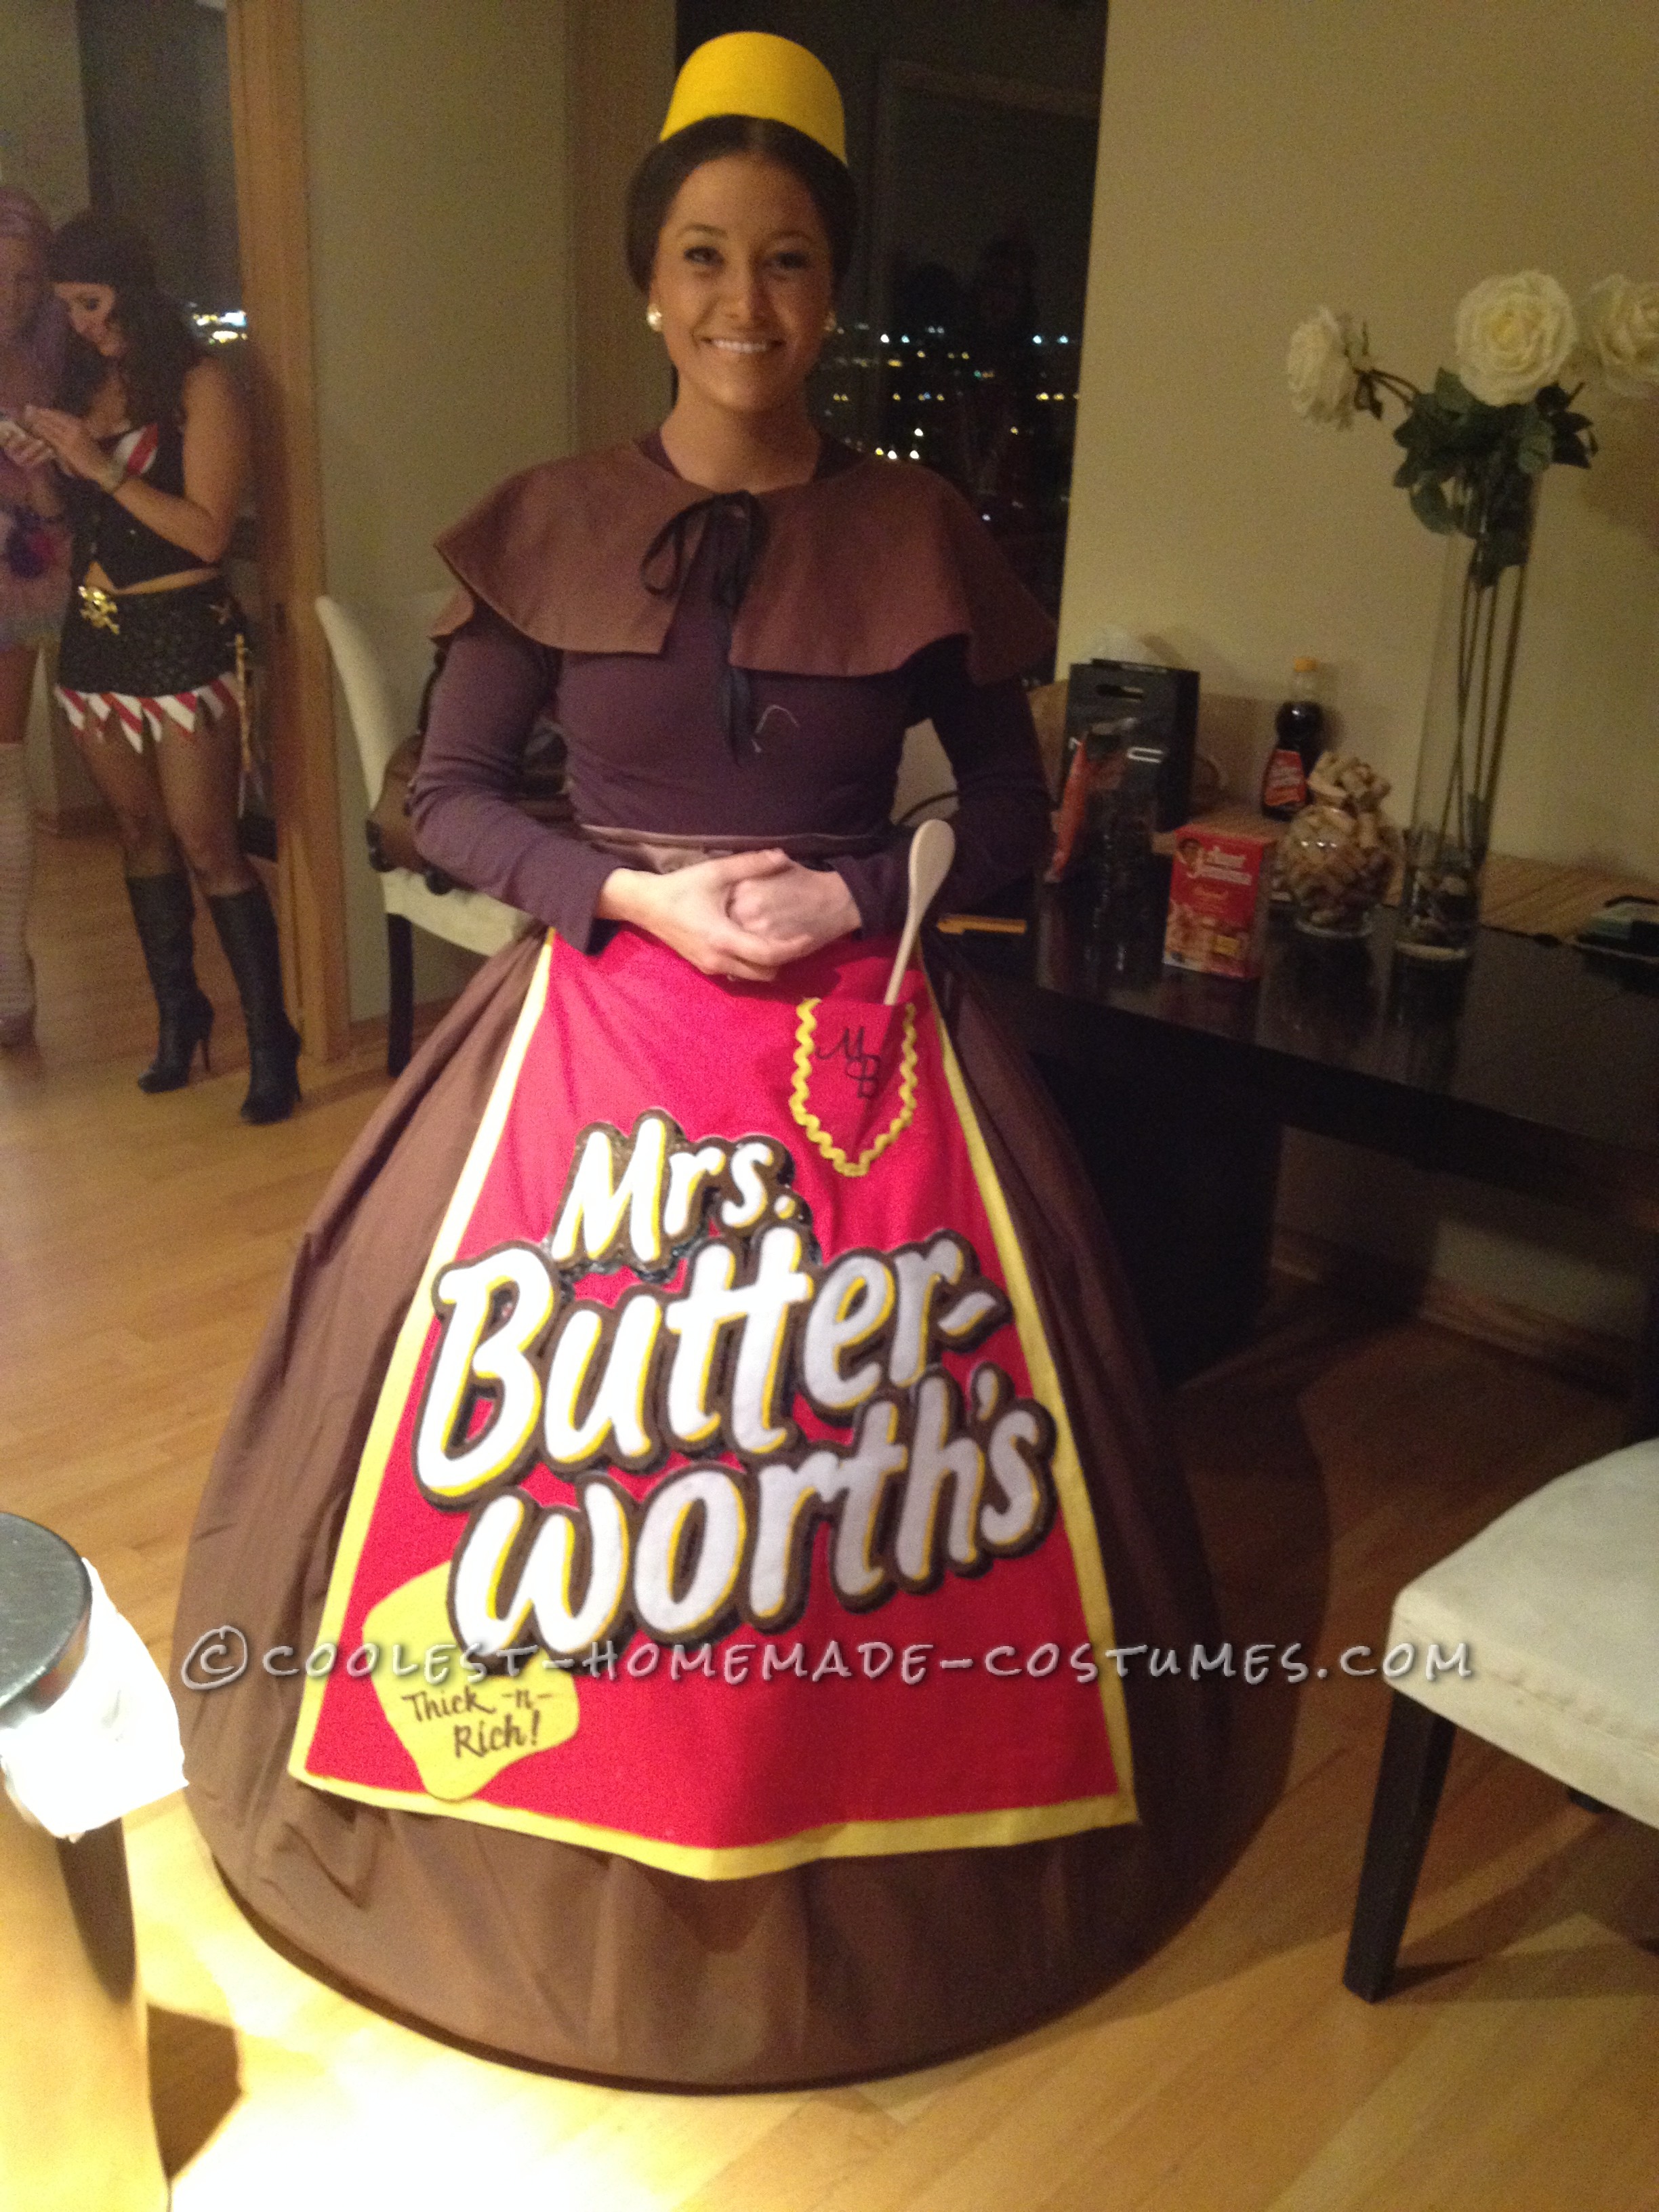 Who Does a "Butter" Homemade Costume than Mrs. Butterworth?